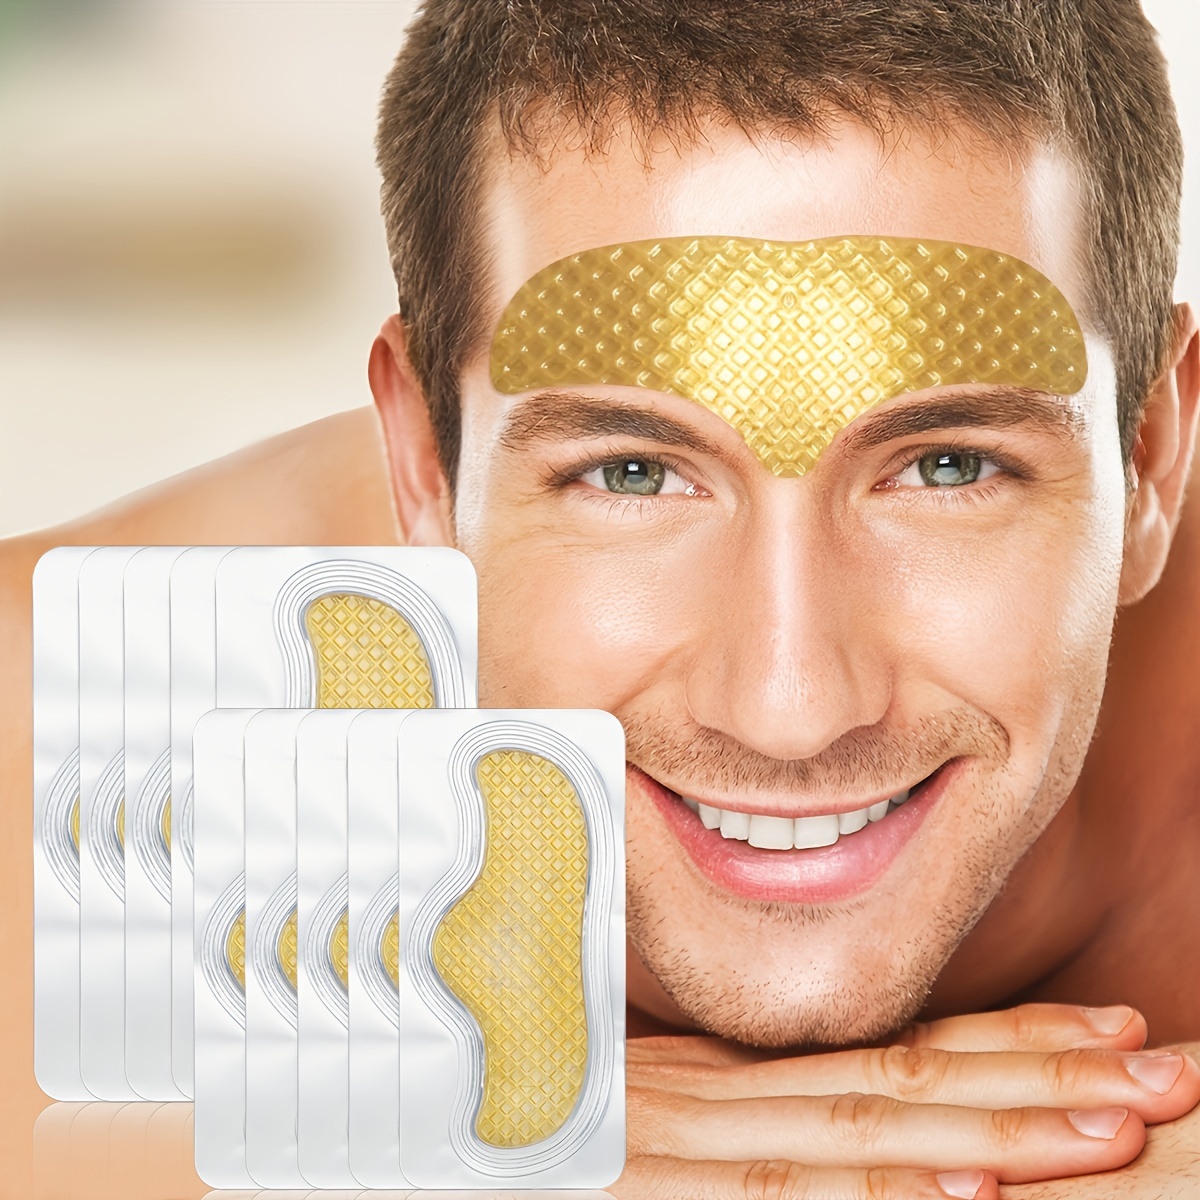 

10pcs Collagen Golden Frontal Mask, Moisturizing And Nourishing Special Patch For Lifting Head Lines, Facial Fine Lines, Lifting And Firming Rejuvenate Your Skin Forehead Patch